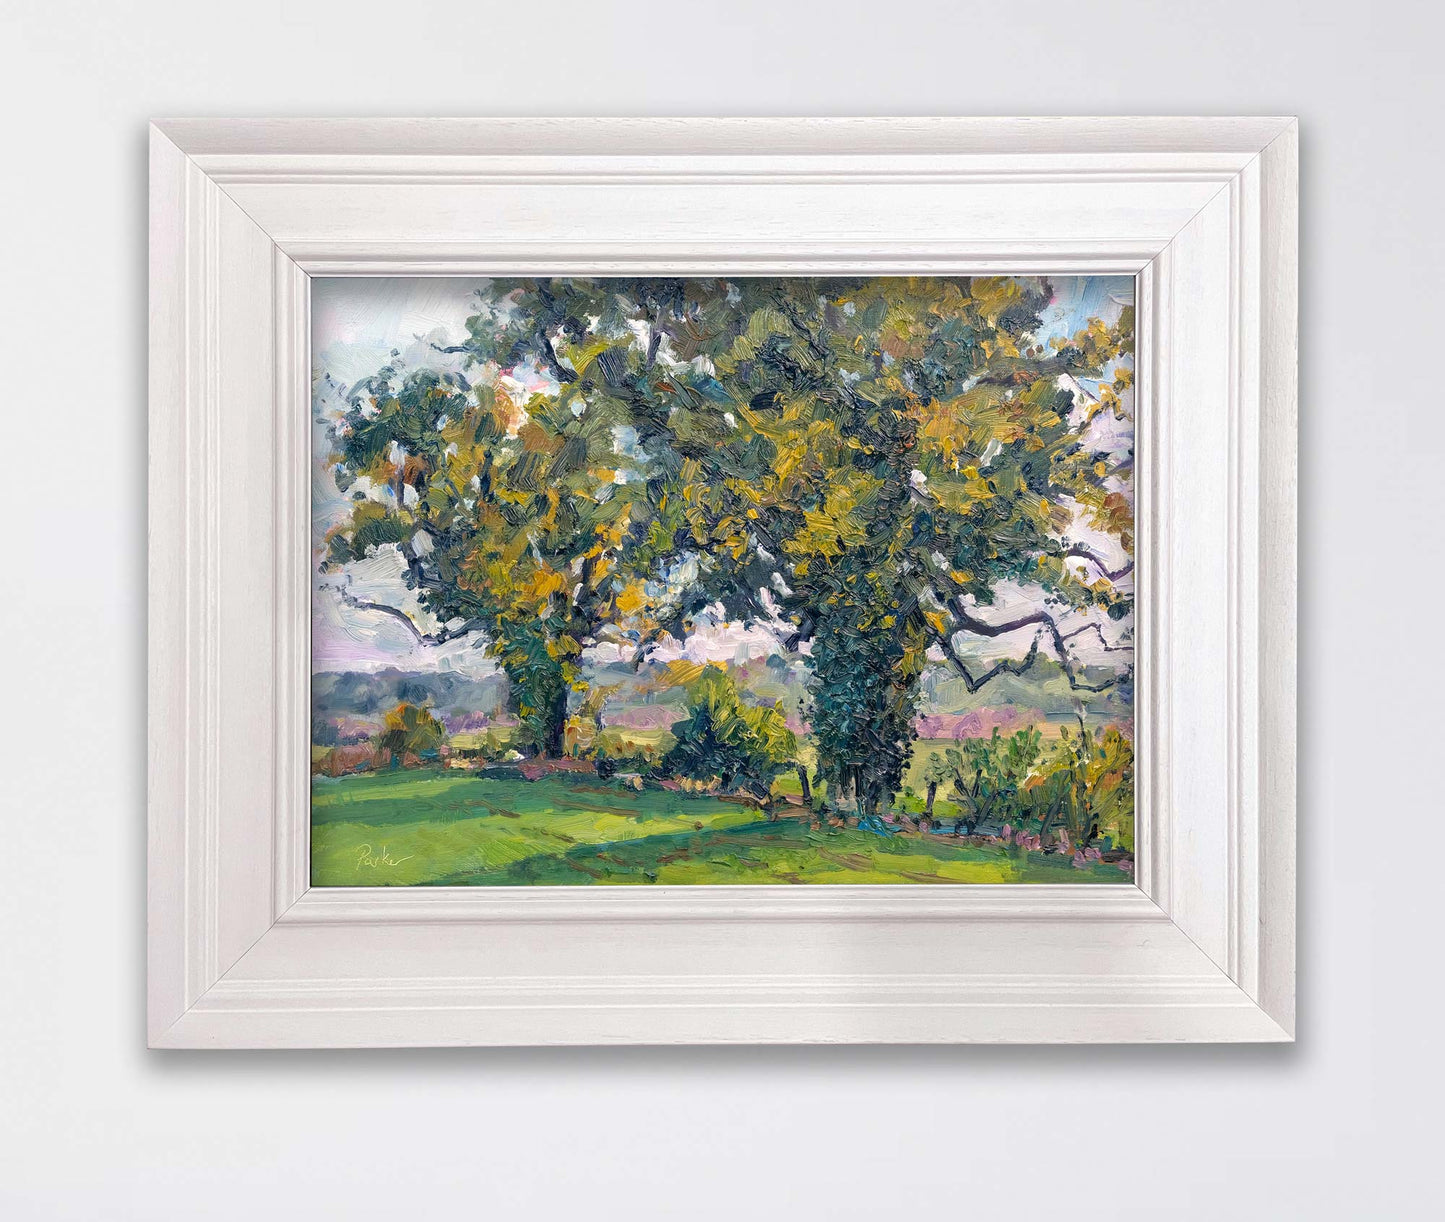 Autumn Oak trees, Coxwold, oil painting in framed view by landscape artist Jeff Parker